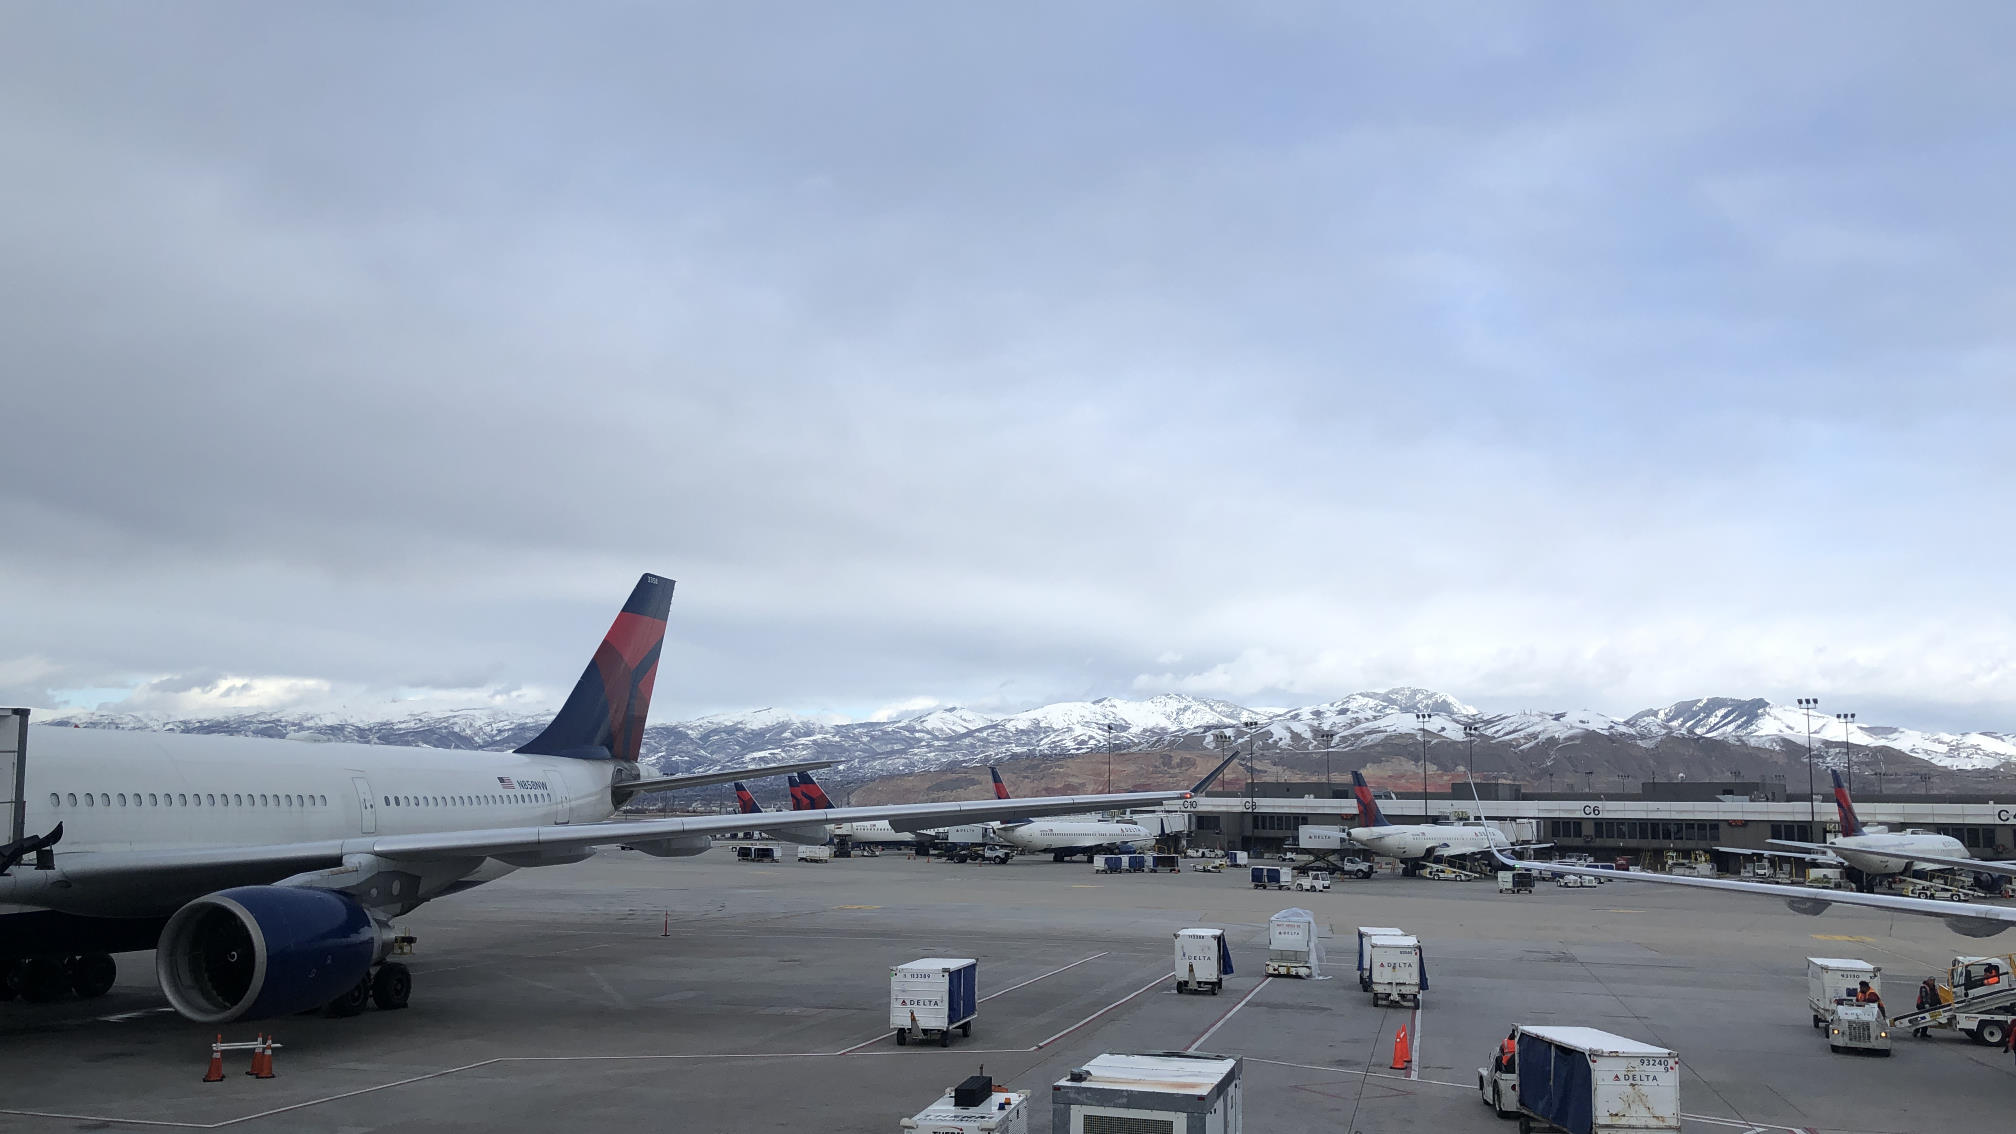 Delta jets and SLC terminals with snow-covered mountains in the distance.